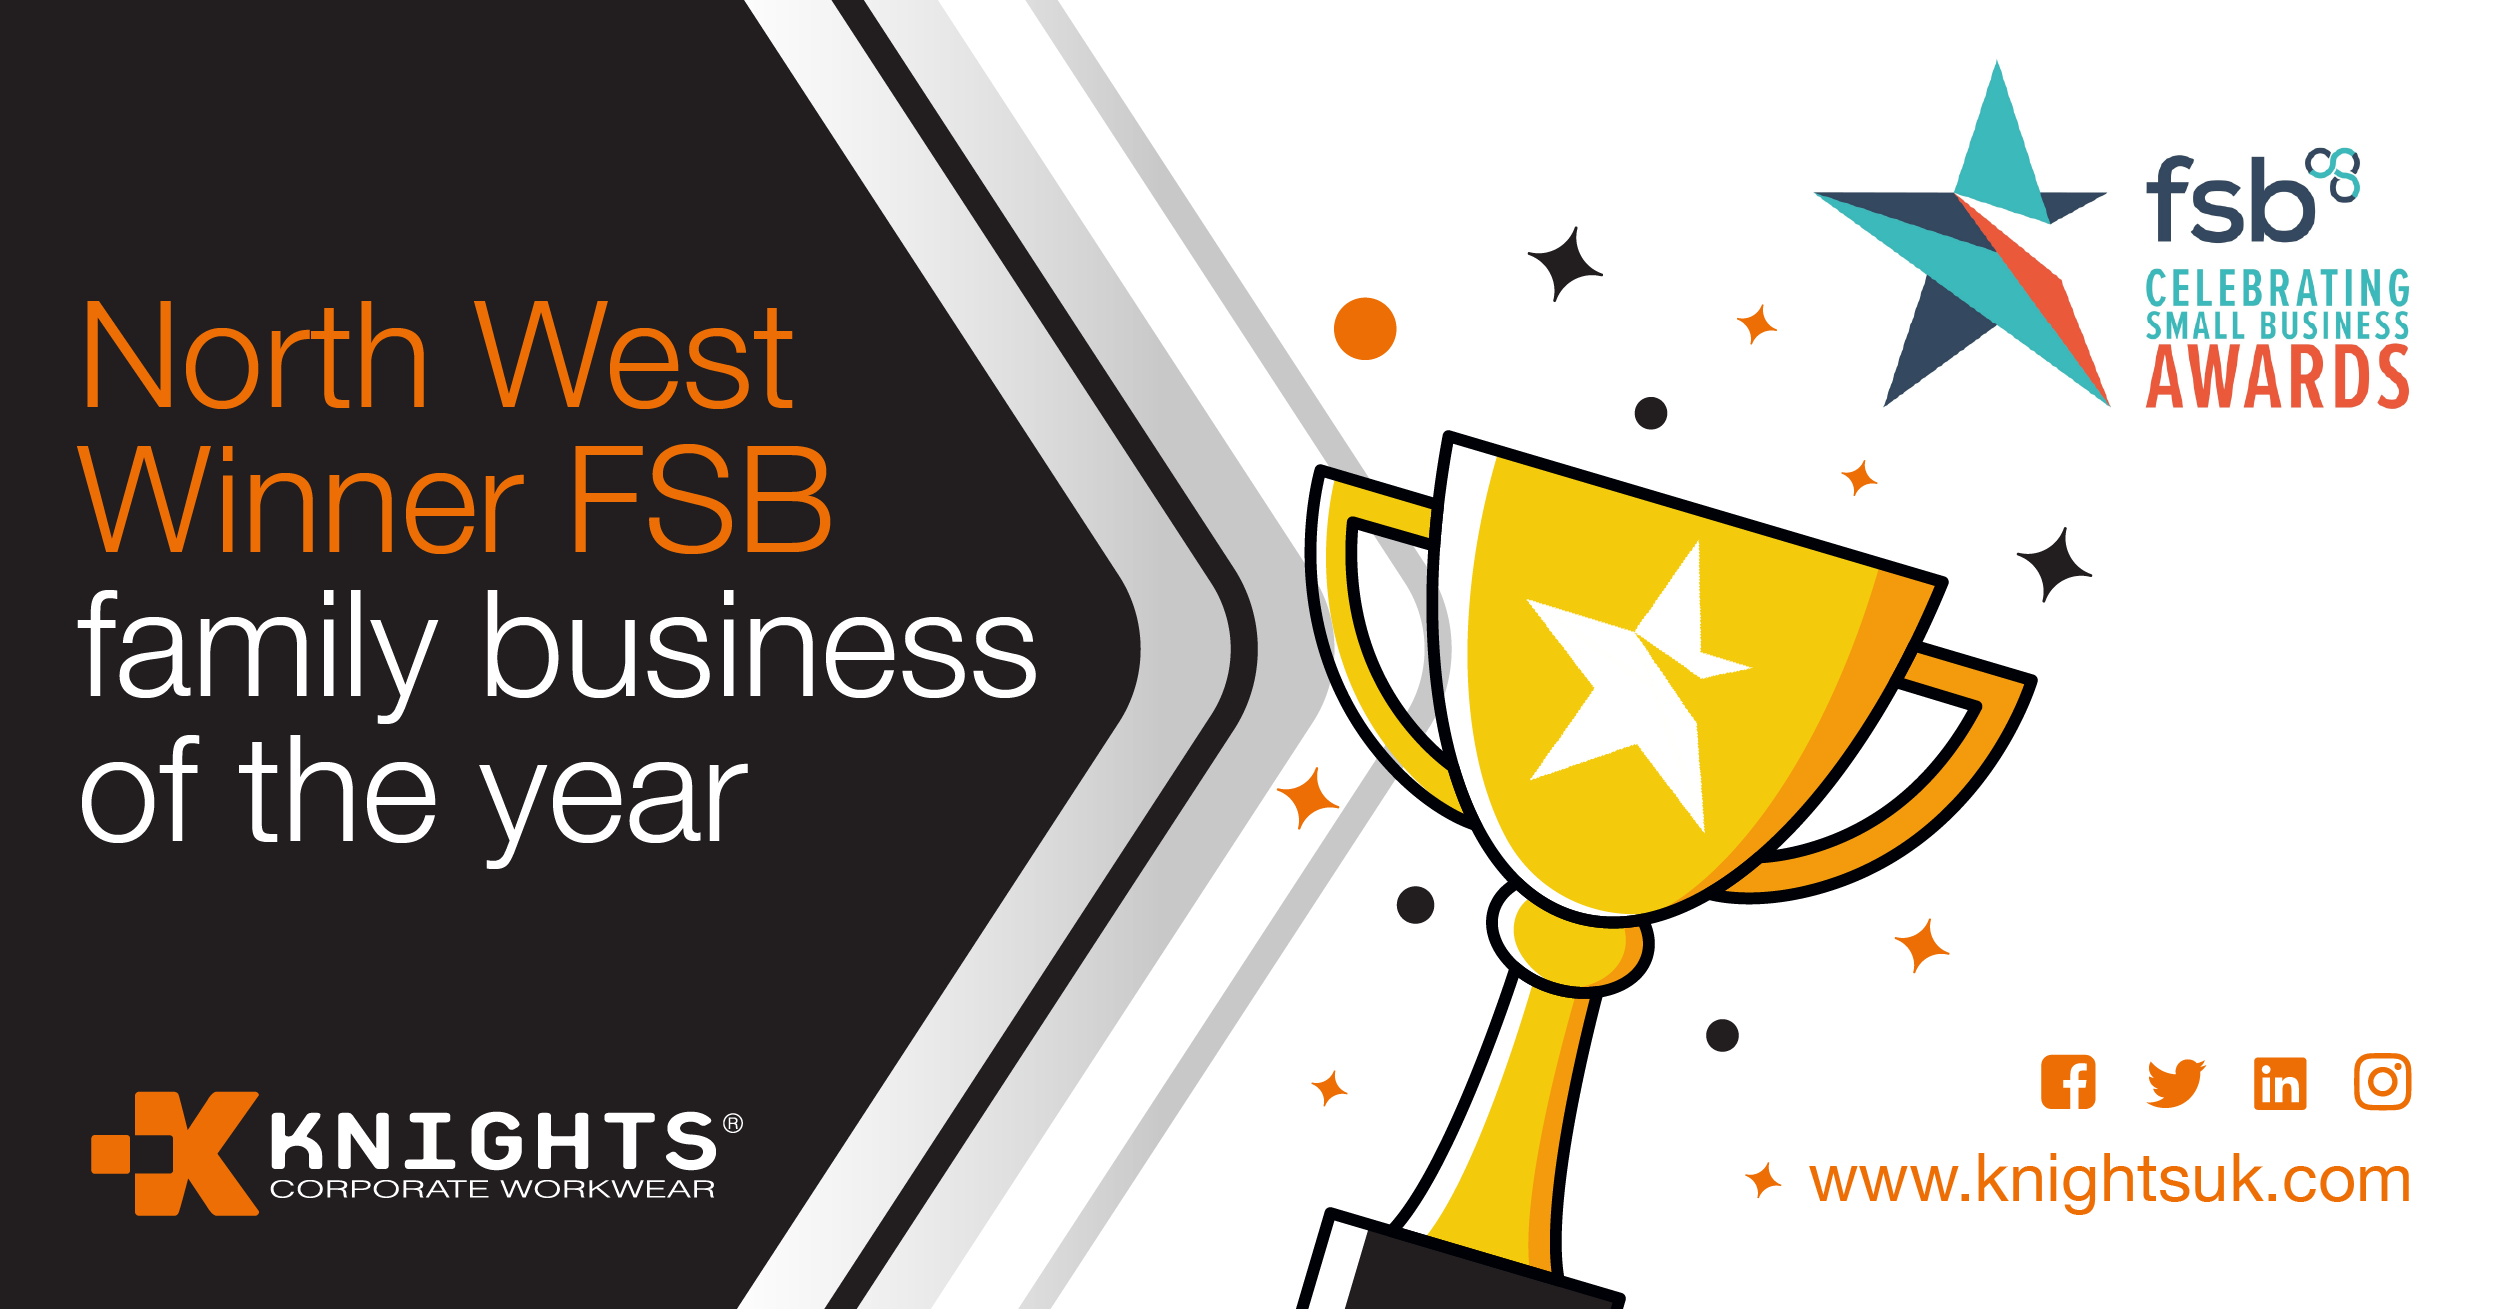 Knights Corporate Workwear are going to the national FSB Awards